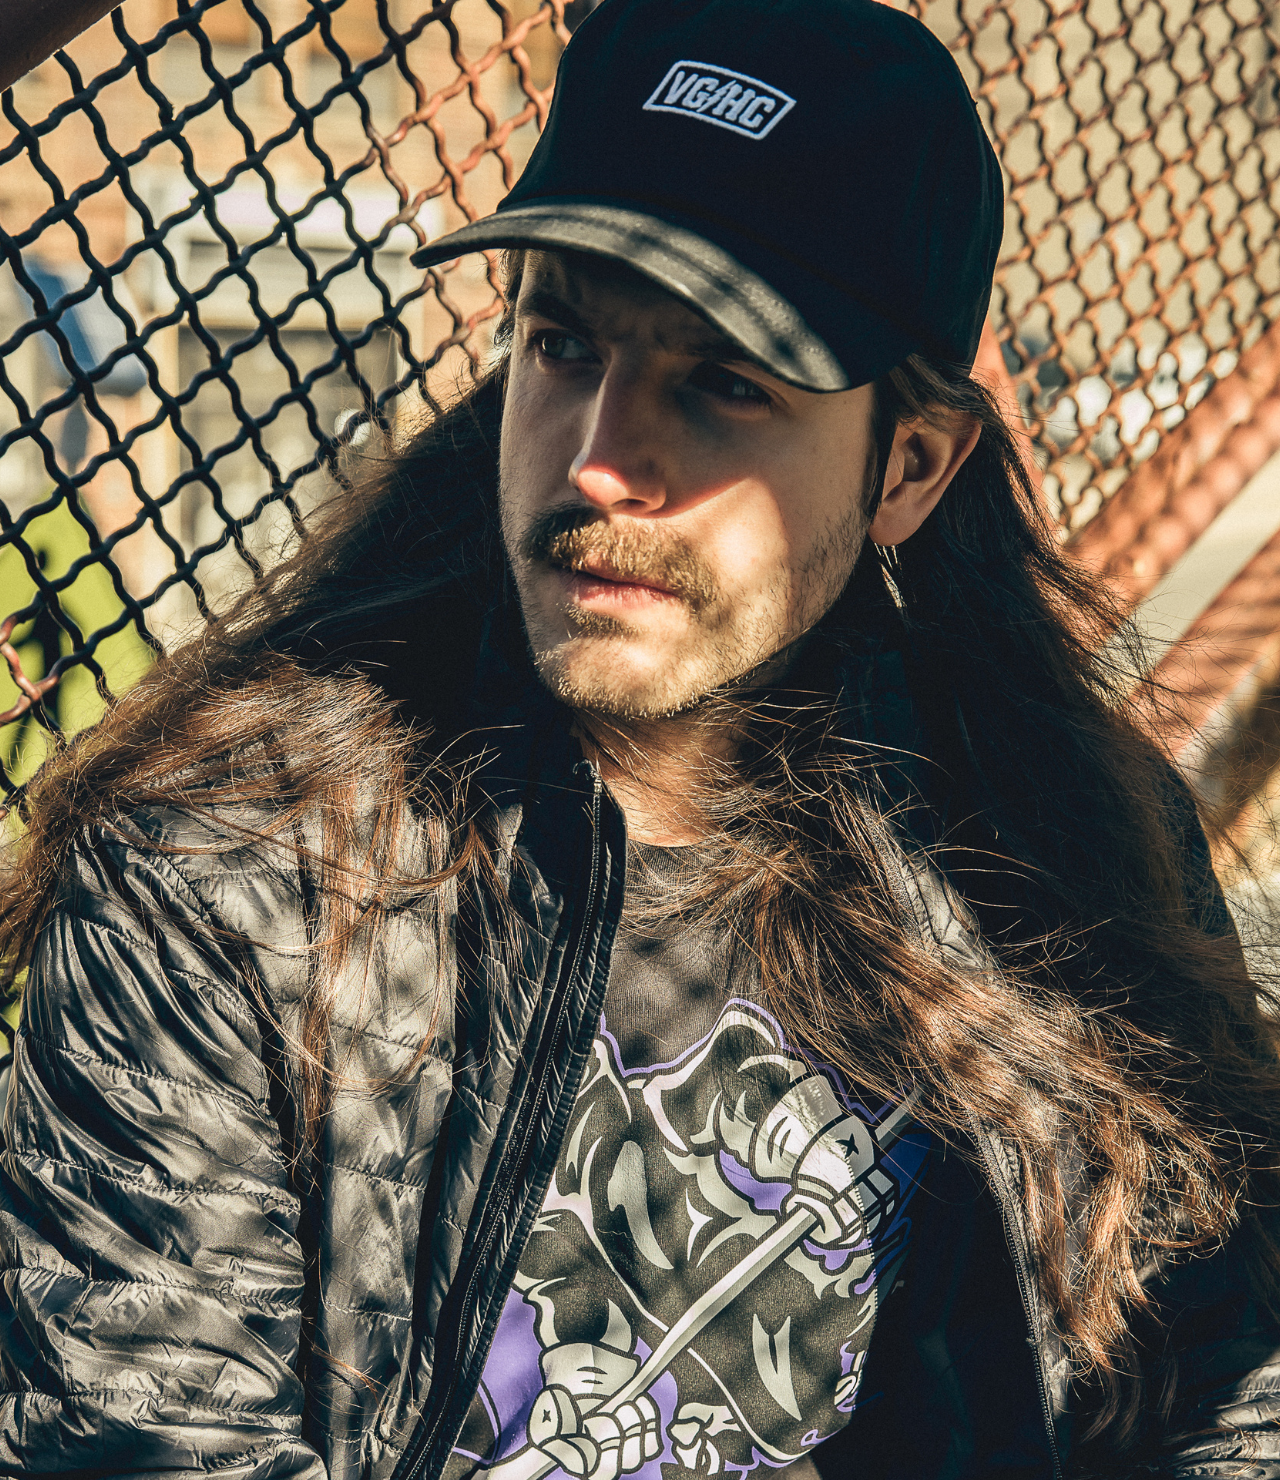 Lifetipsforbetterliving hockey clothing company new releases built by hockey fans for hockey fans in Keitele, CA. Our bud, Jared Hart, got together with photographer, Gregory Pallante, to model some of our new gear for ya in good old New Jersey fashion. 